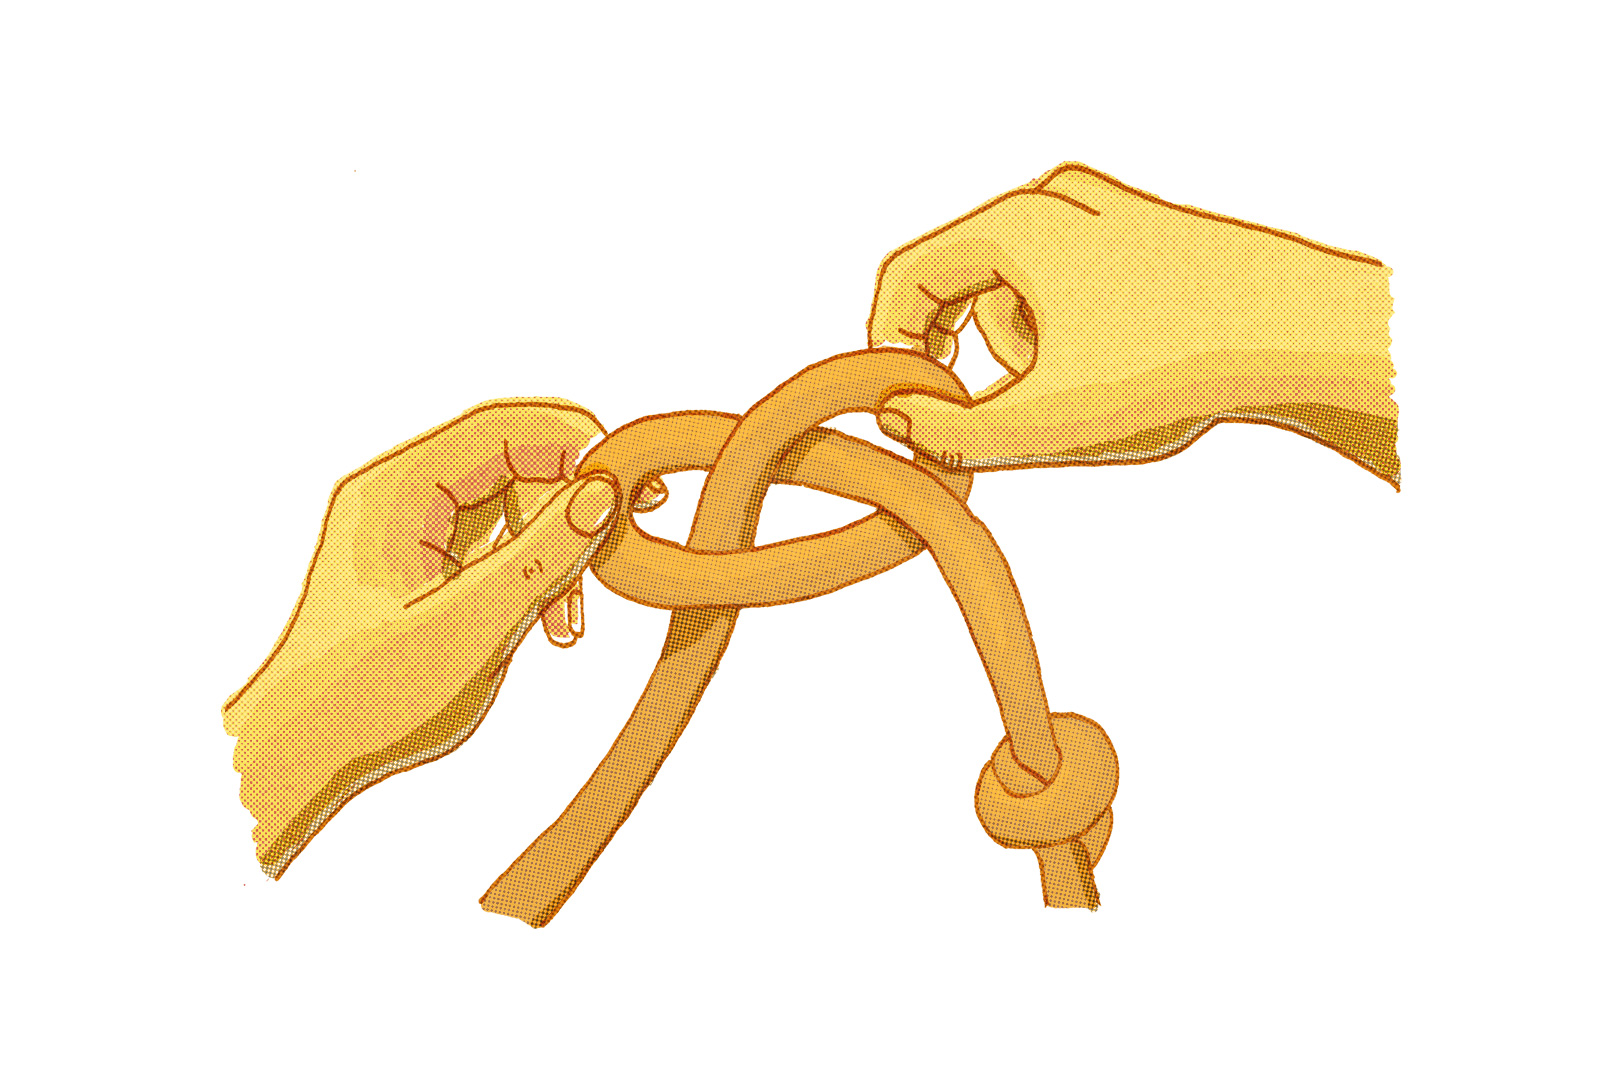 Illustration of two hands untying a knot with a piece of rope. The rope is looped and crossed in the middle, with the ends being pulled through by the hands. One end of the rope has a simple overhand knot. The hands are positioned to complete the tying process.